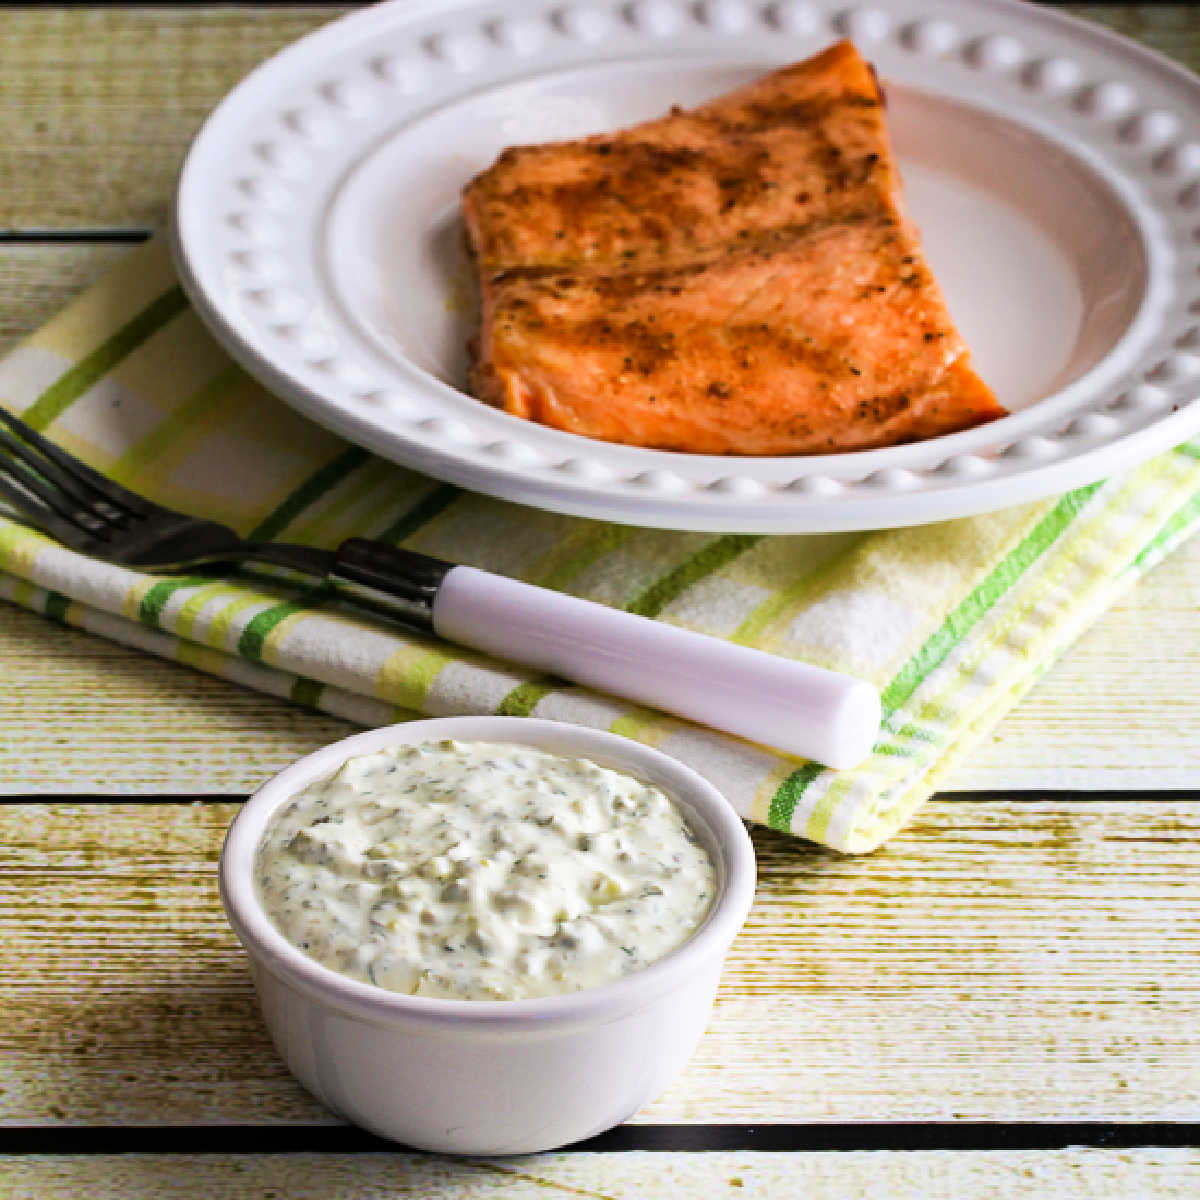 Square image of double dill tartar sauce with tartar sauce in a bowl and cooked salmon on a plate in the background